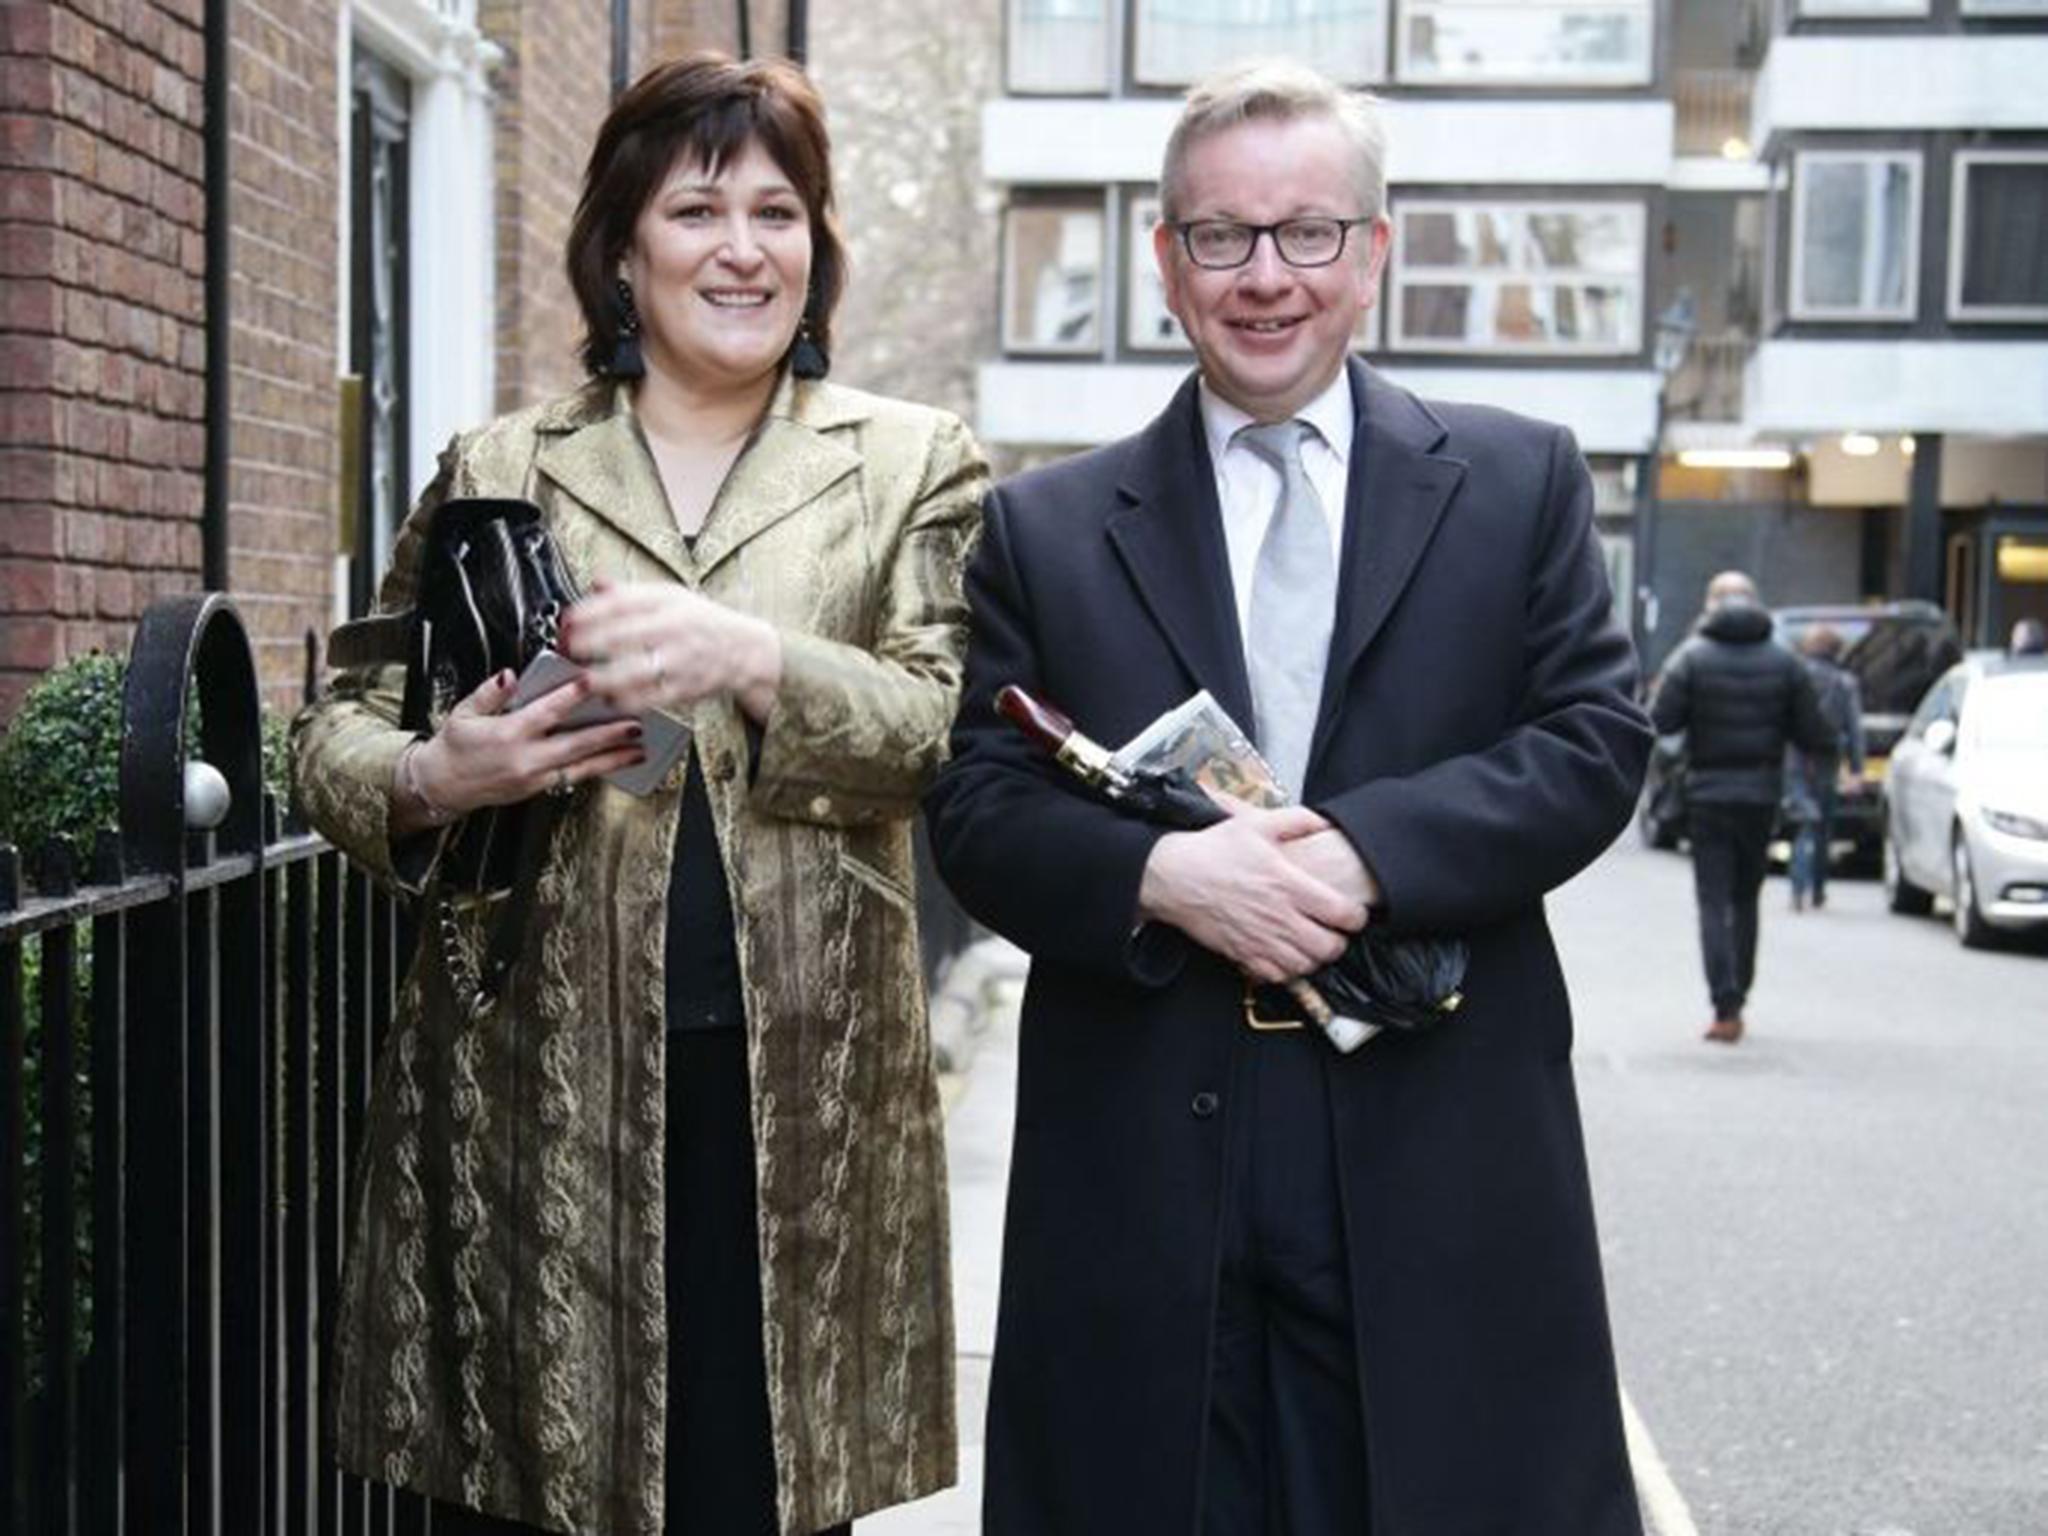 Sarah Vine and Michael Gove earlier this year. The leaked email was sent from Ms Vine to her husband and his aides